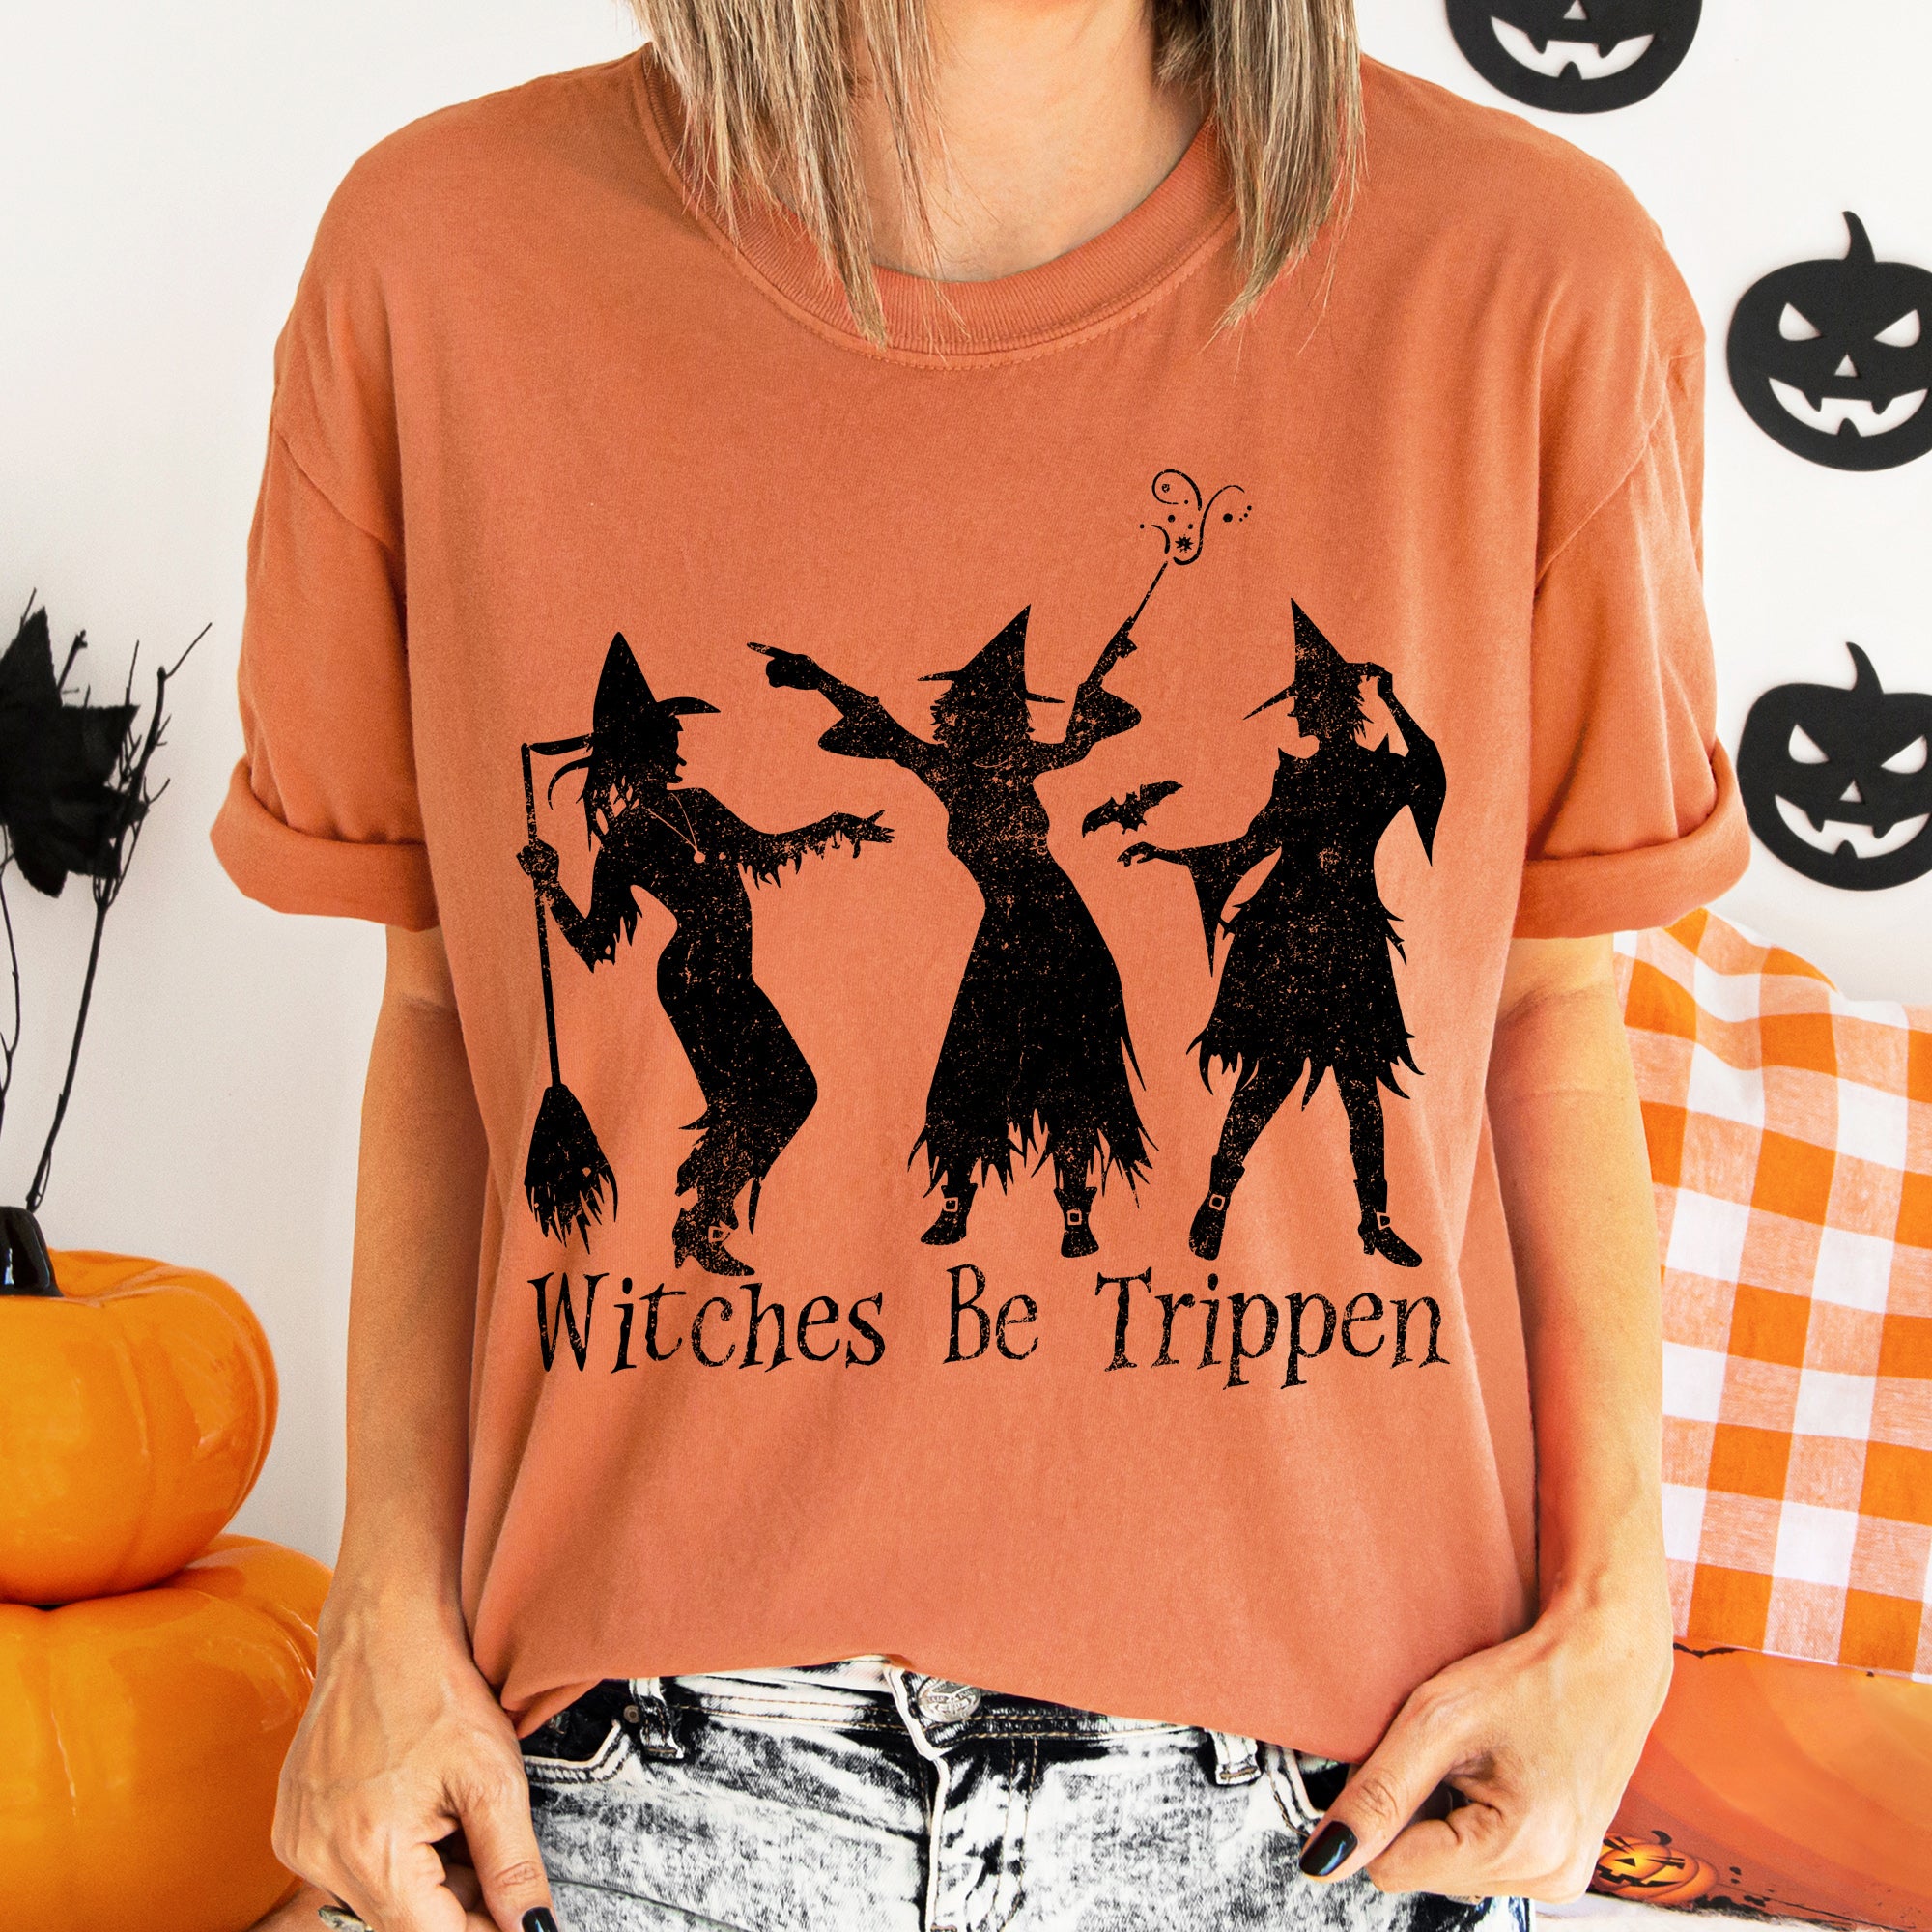 Witches Be Trippin Halloween T-shirt Black Print